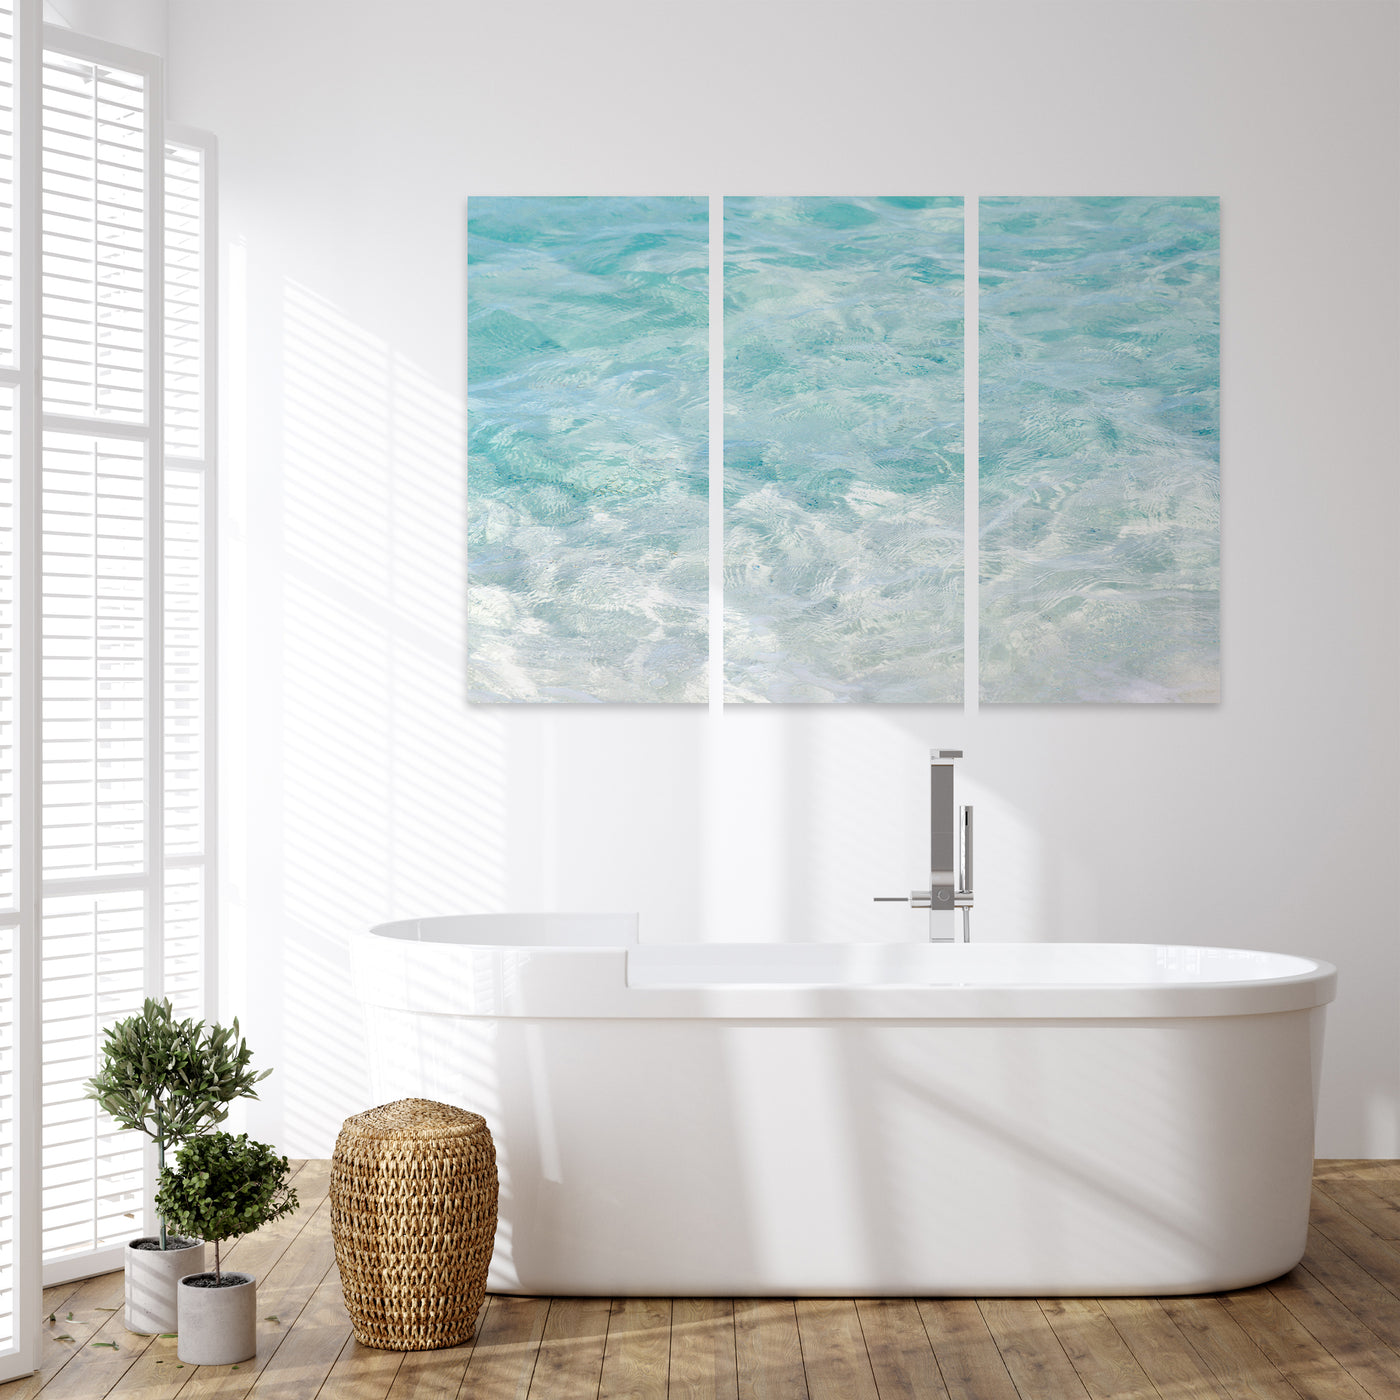 Turquoise Water - Multiple panel wall art by Cattie Coyle Photography  in bathroom